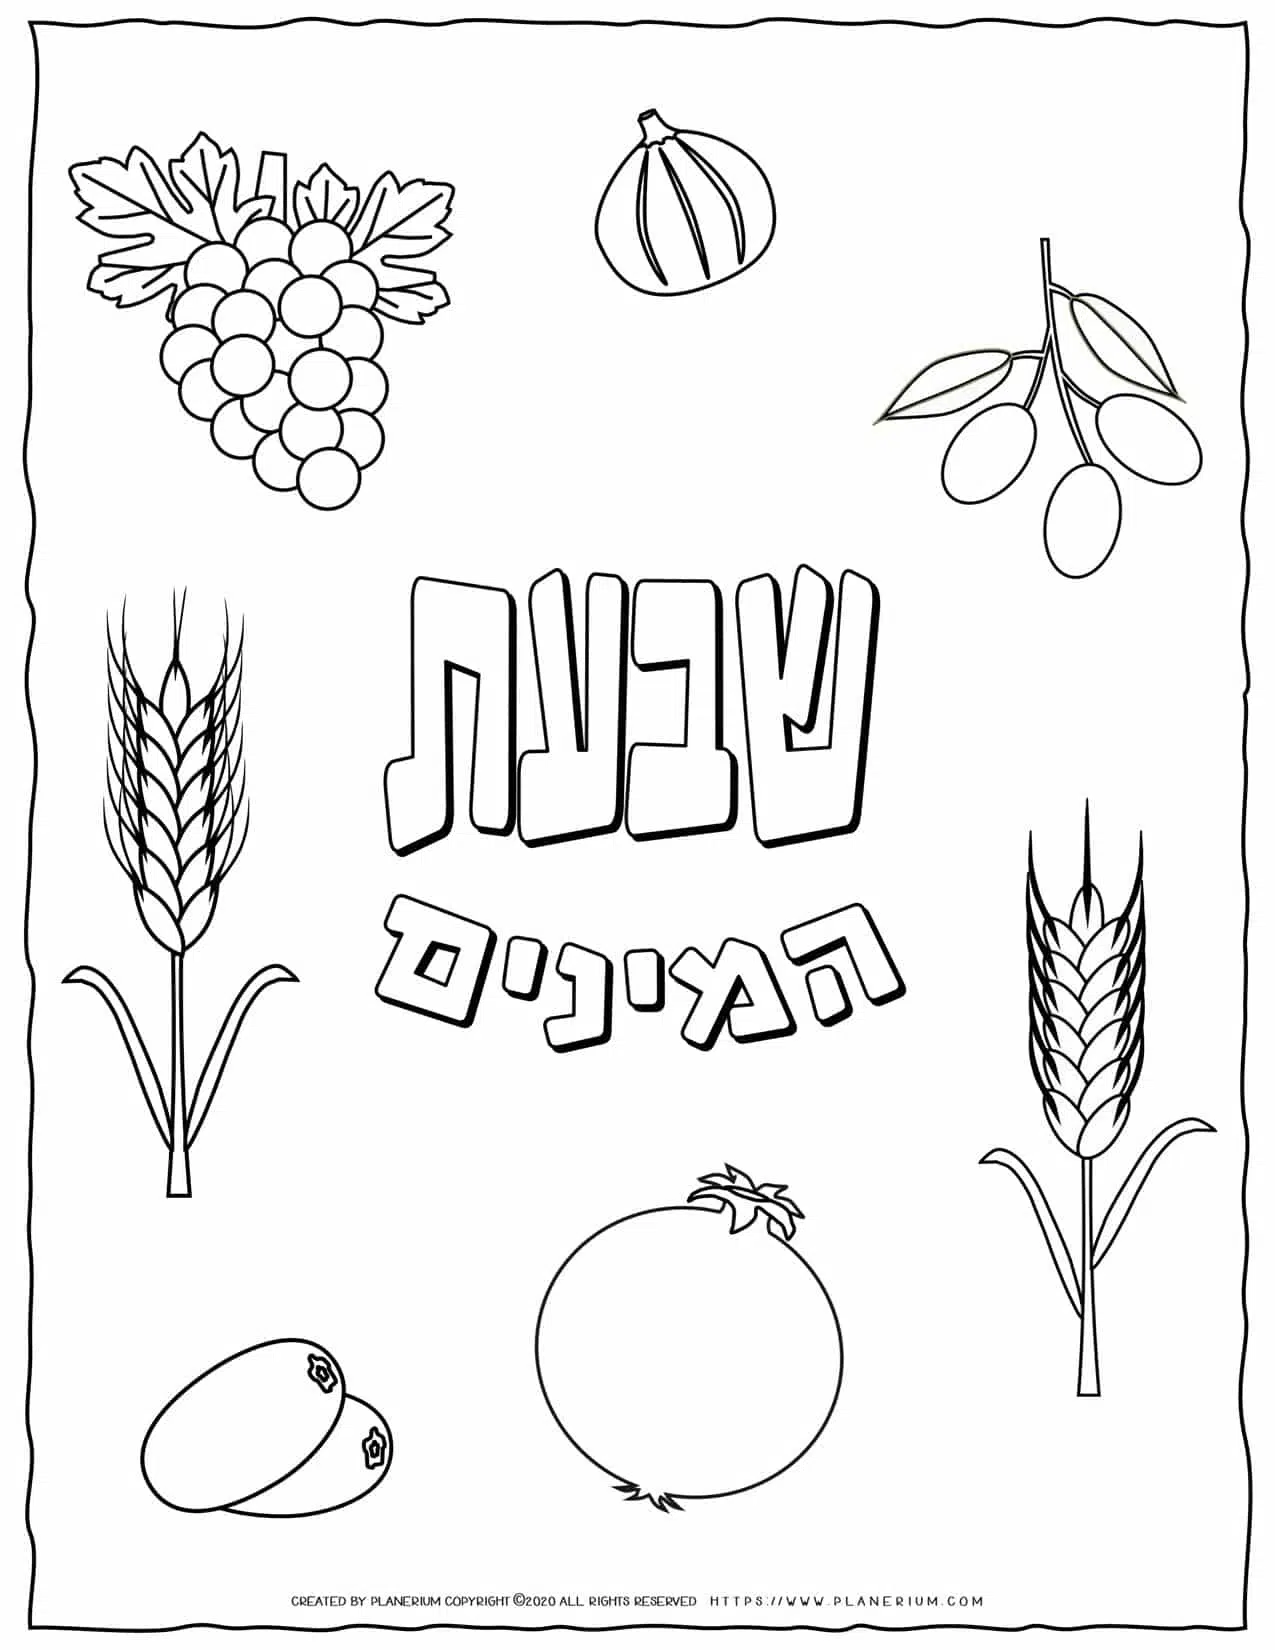 Shavuot Coloring Page - The Seven Species in Hebrew | Planerium